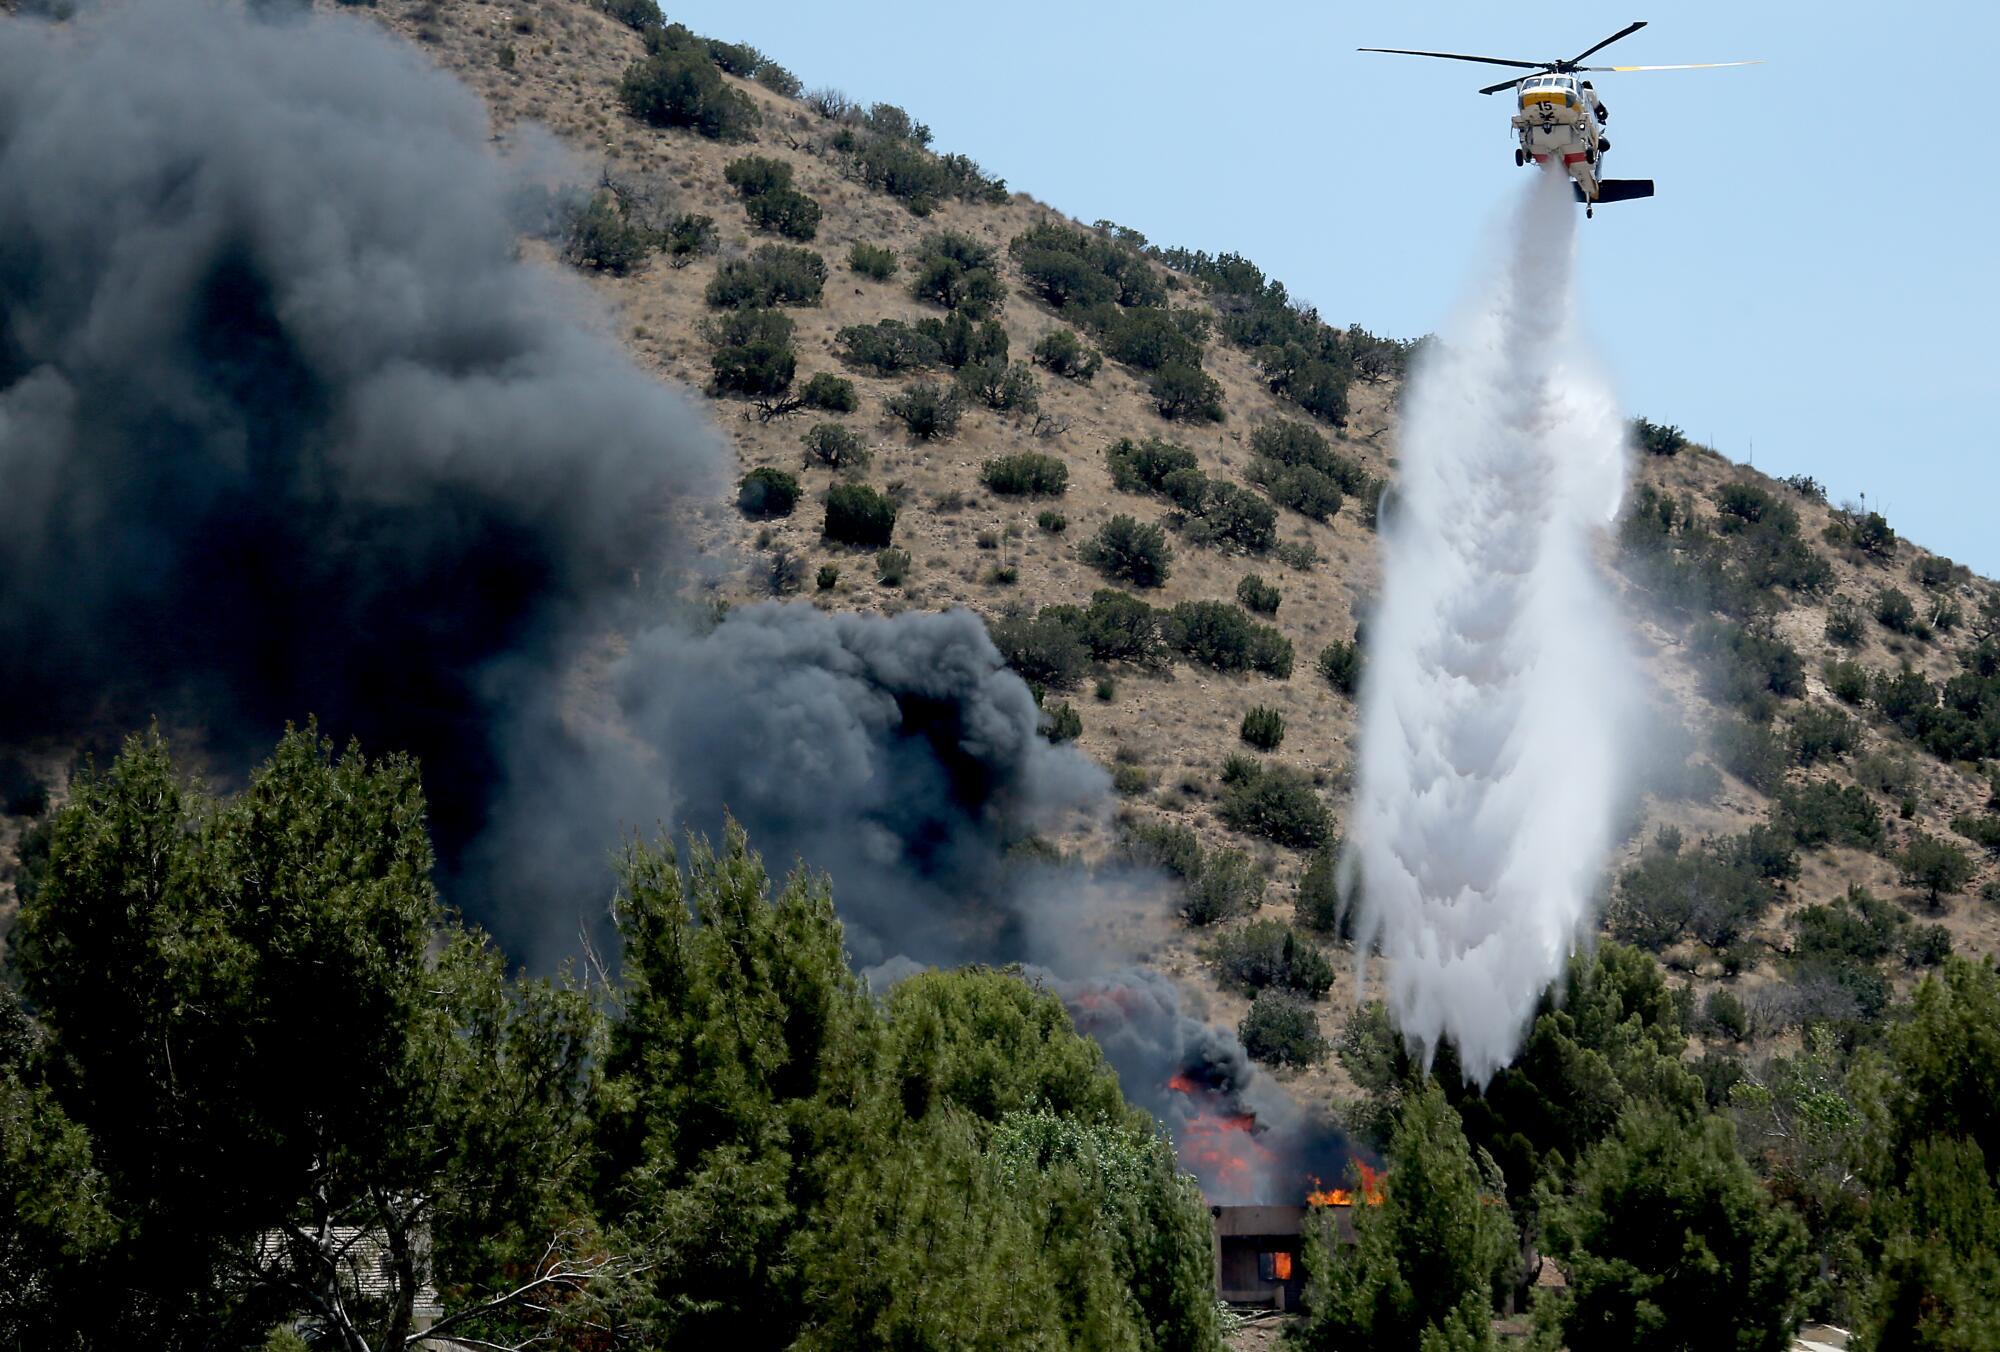 Above a scrub-covered hillside a helicopter hovers and releases a white plume on a burning structure.